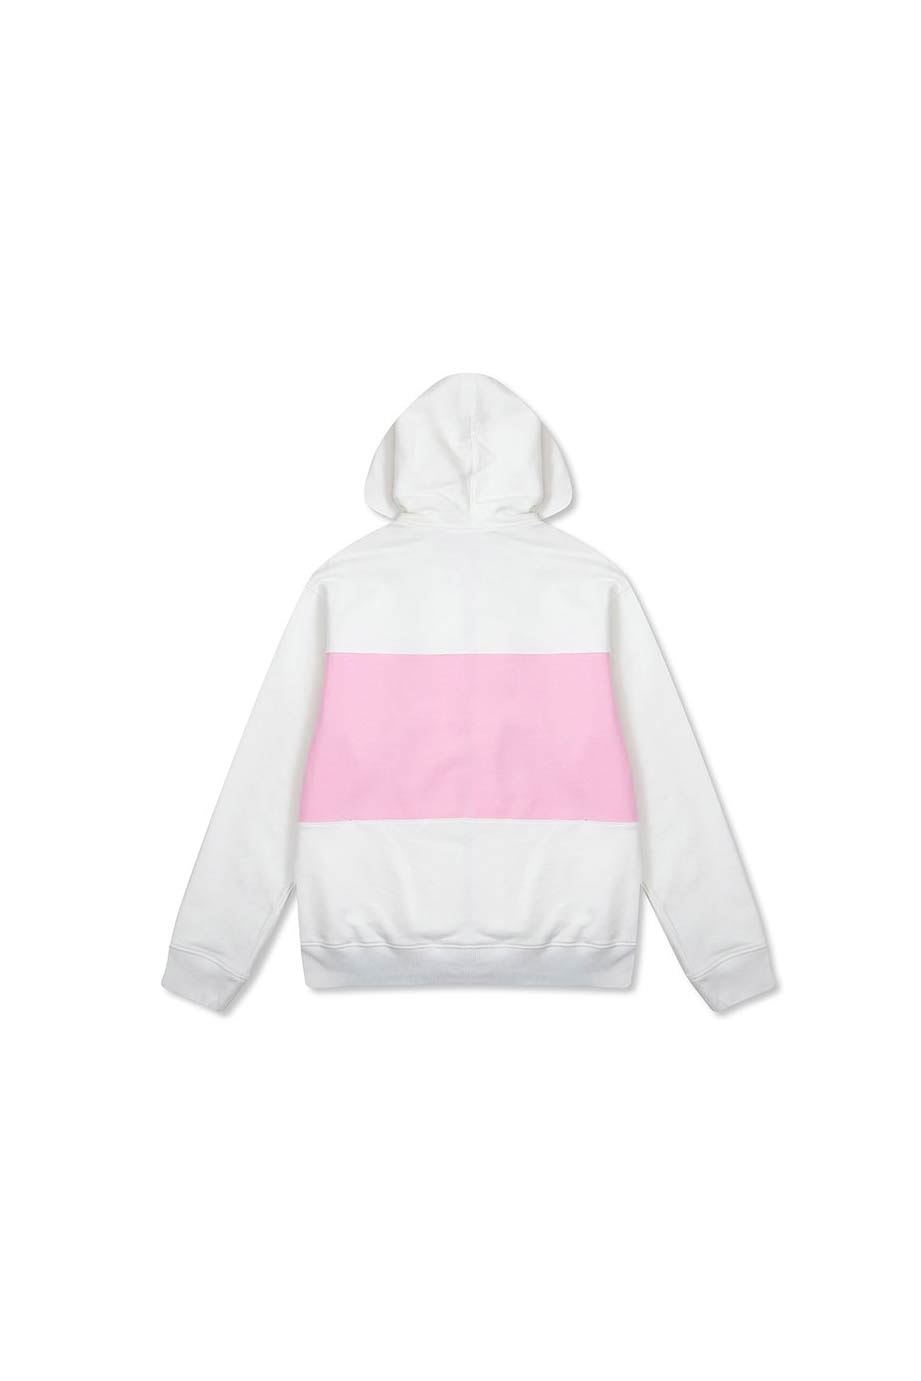 Helmut Lang Campaign Zip Hoodie White Perfect Pink